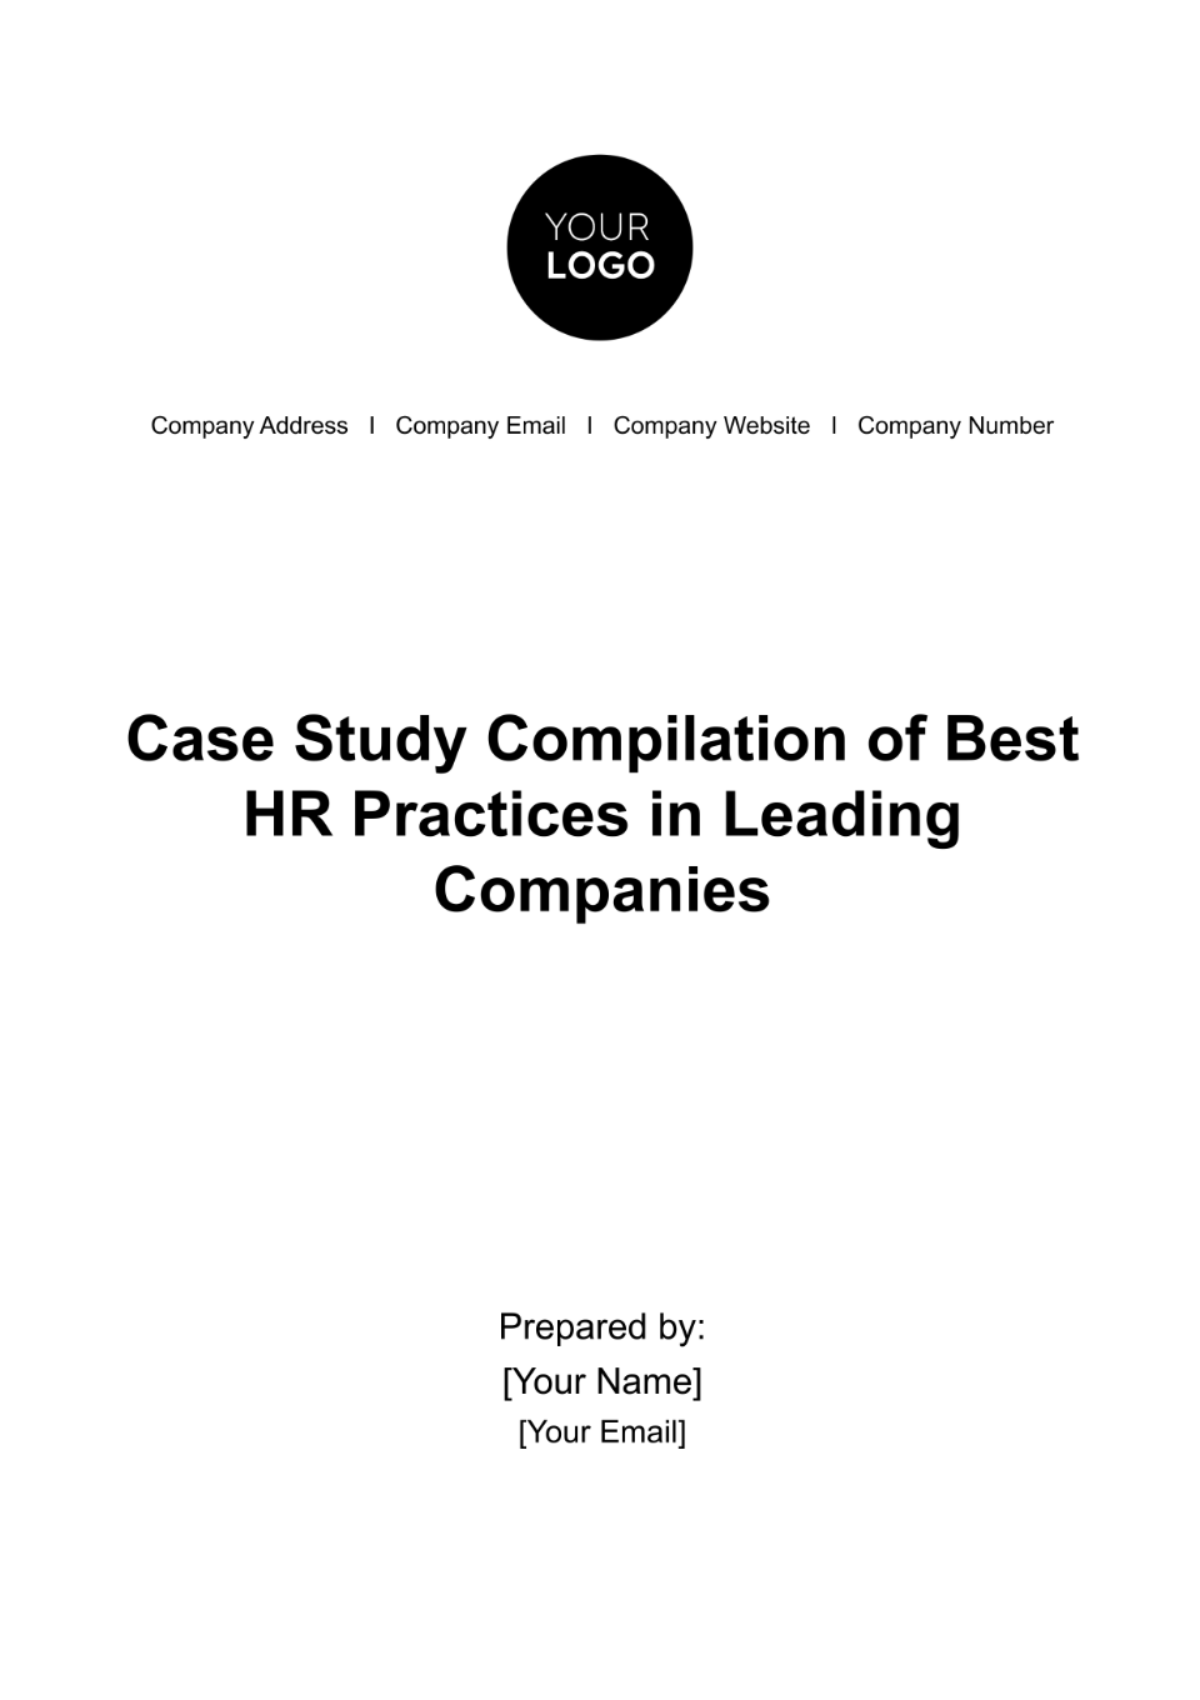 Free Case Study Compilation of Best HR Practices in Leading Companies Template